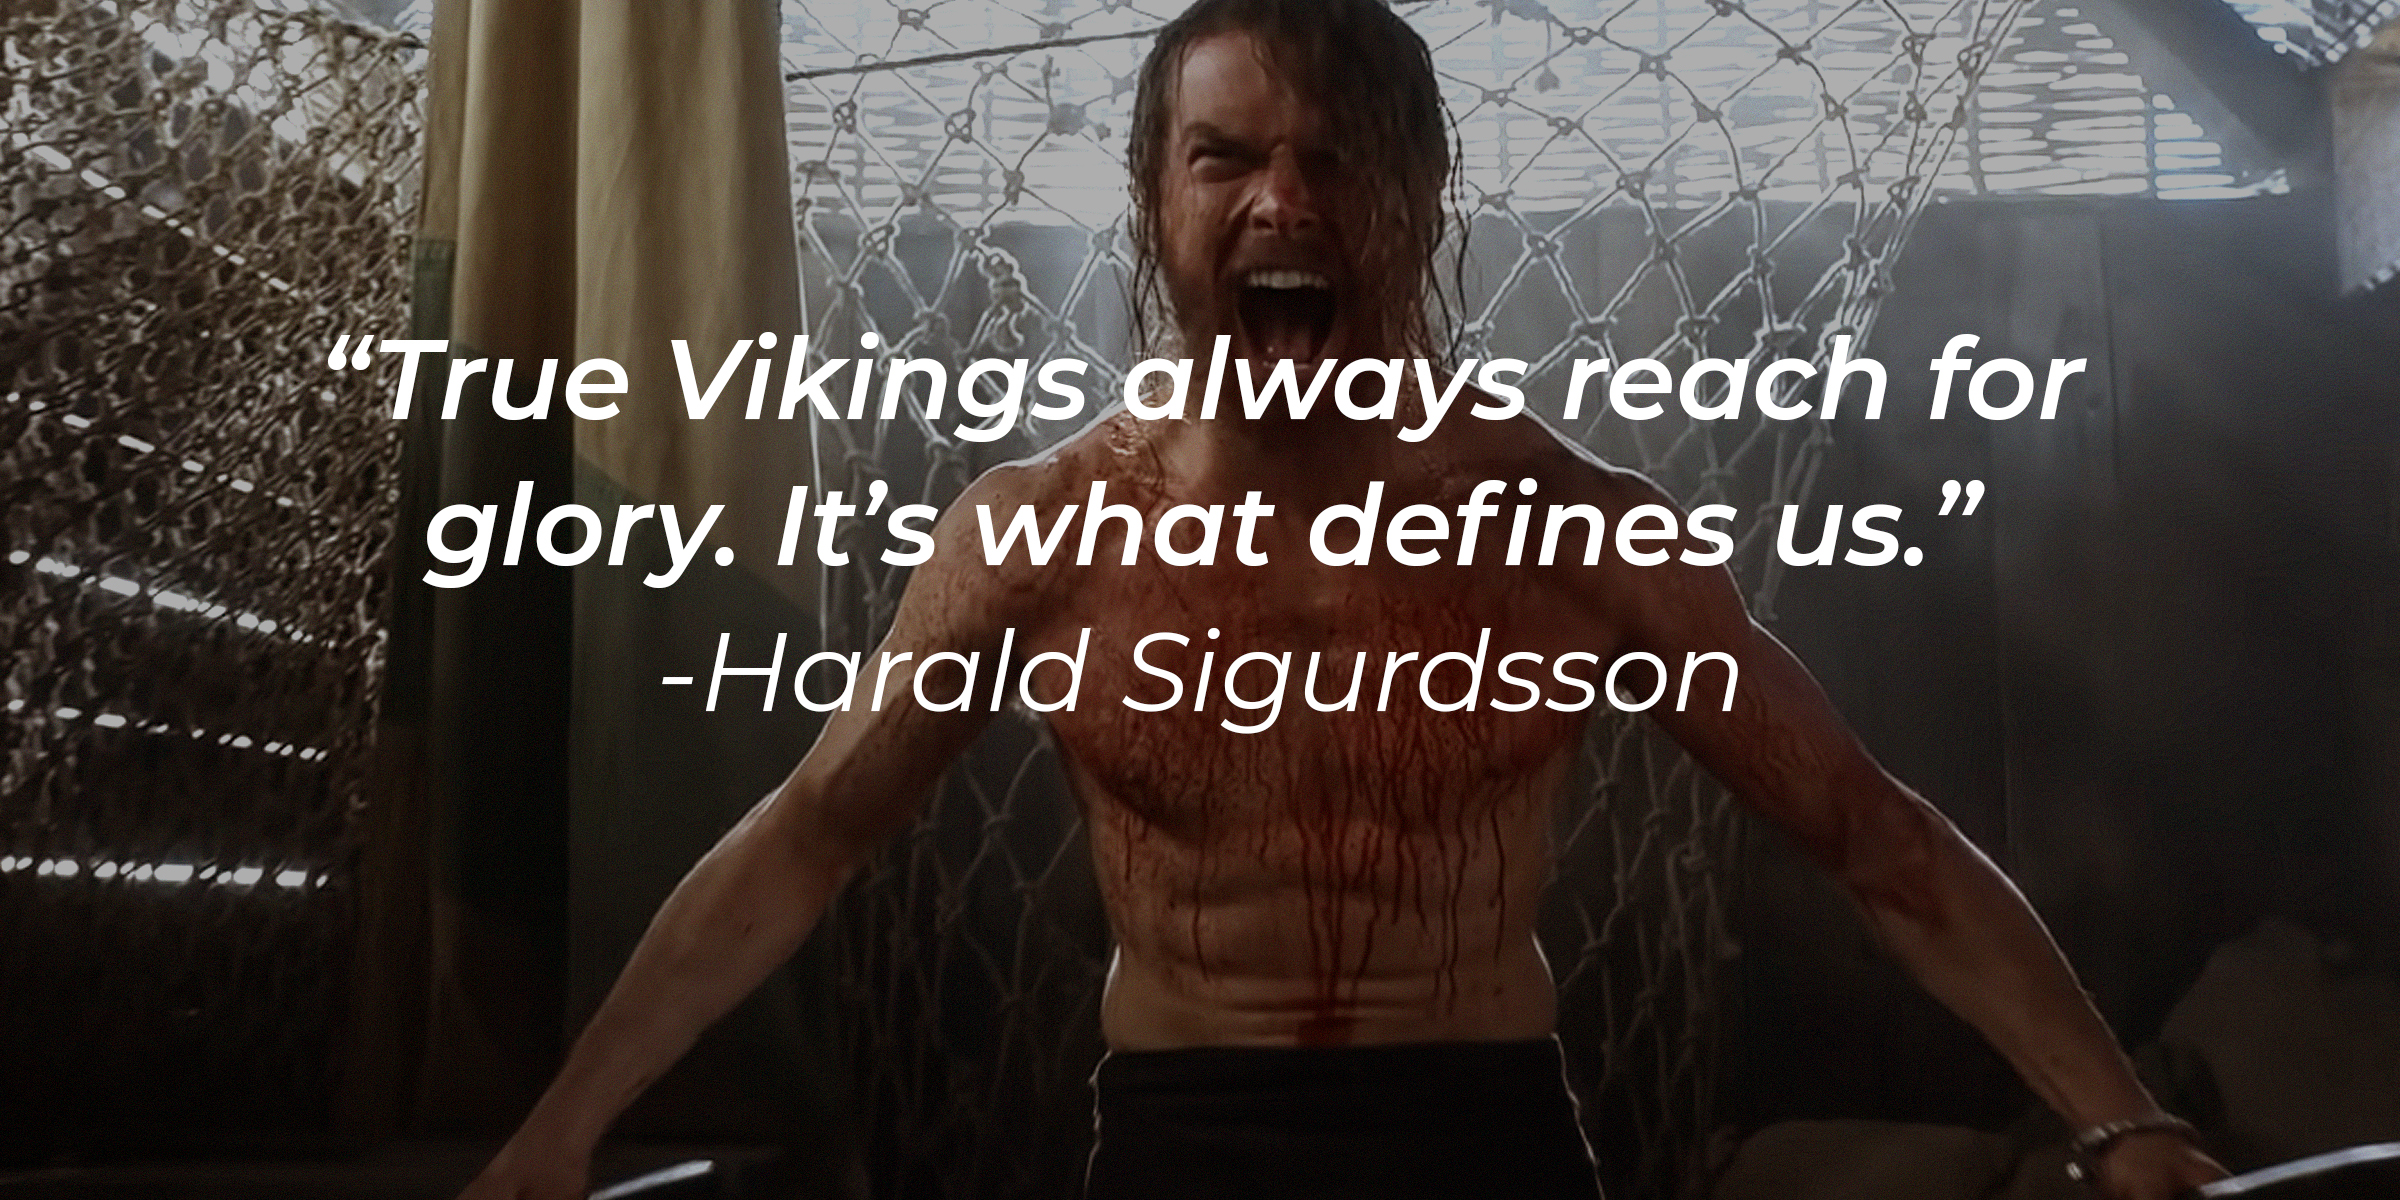 A picture of Harald Sigurdsson with his quote: “True Vikings always reach for glory. It’s what defines us.” | Source: youtube.com/Netflix